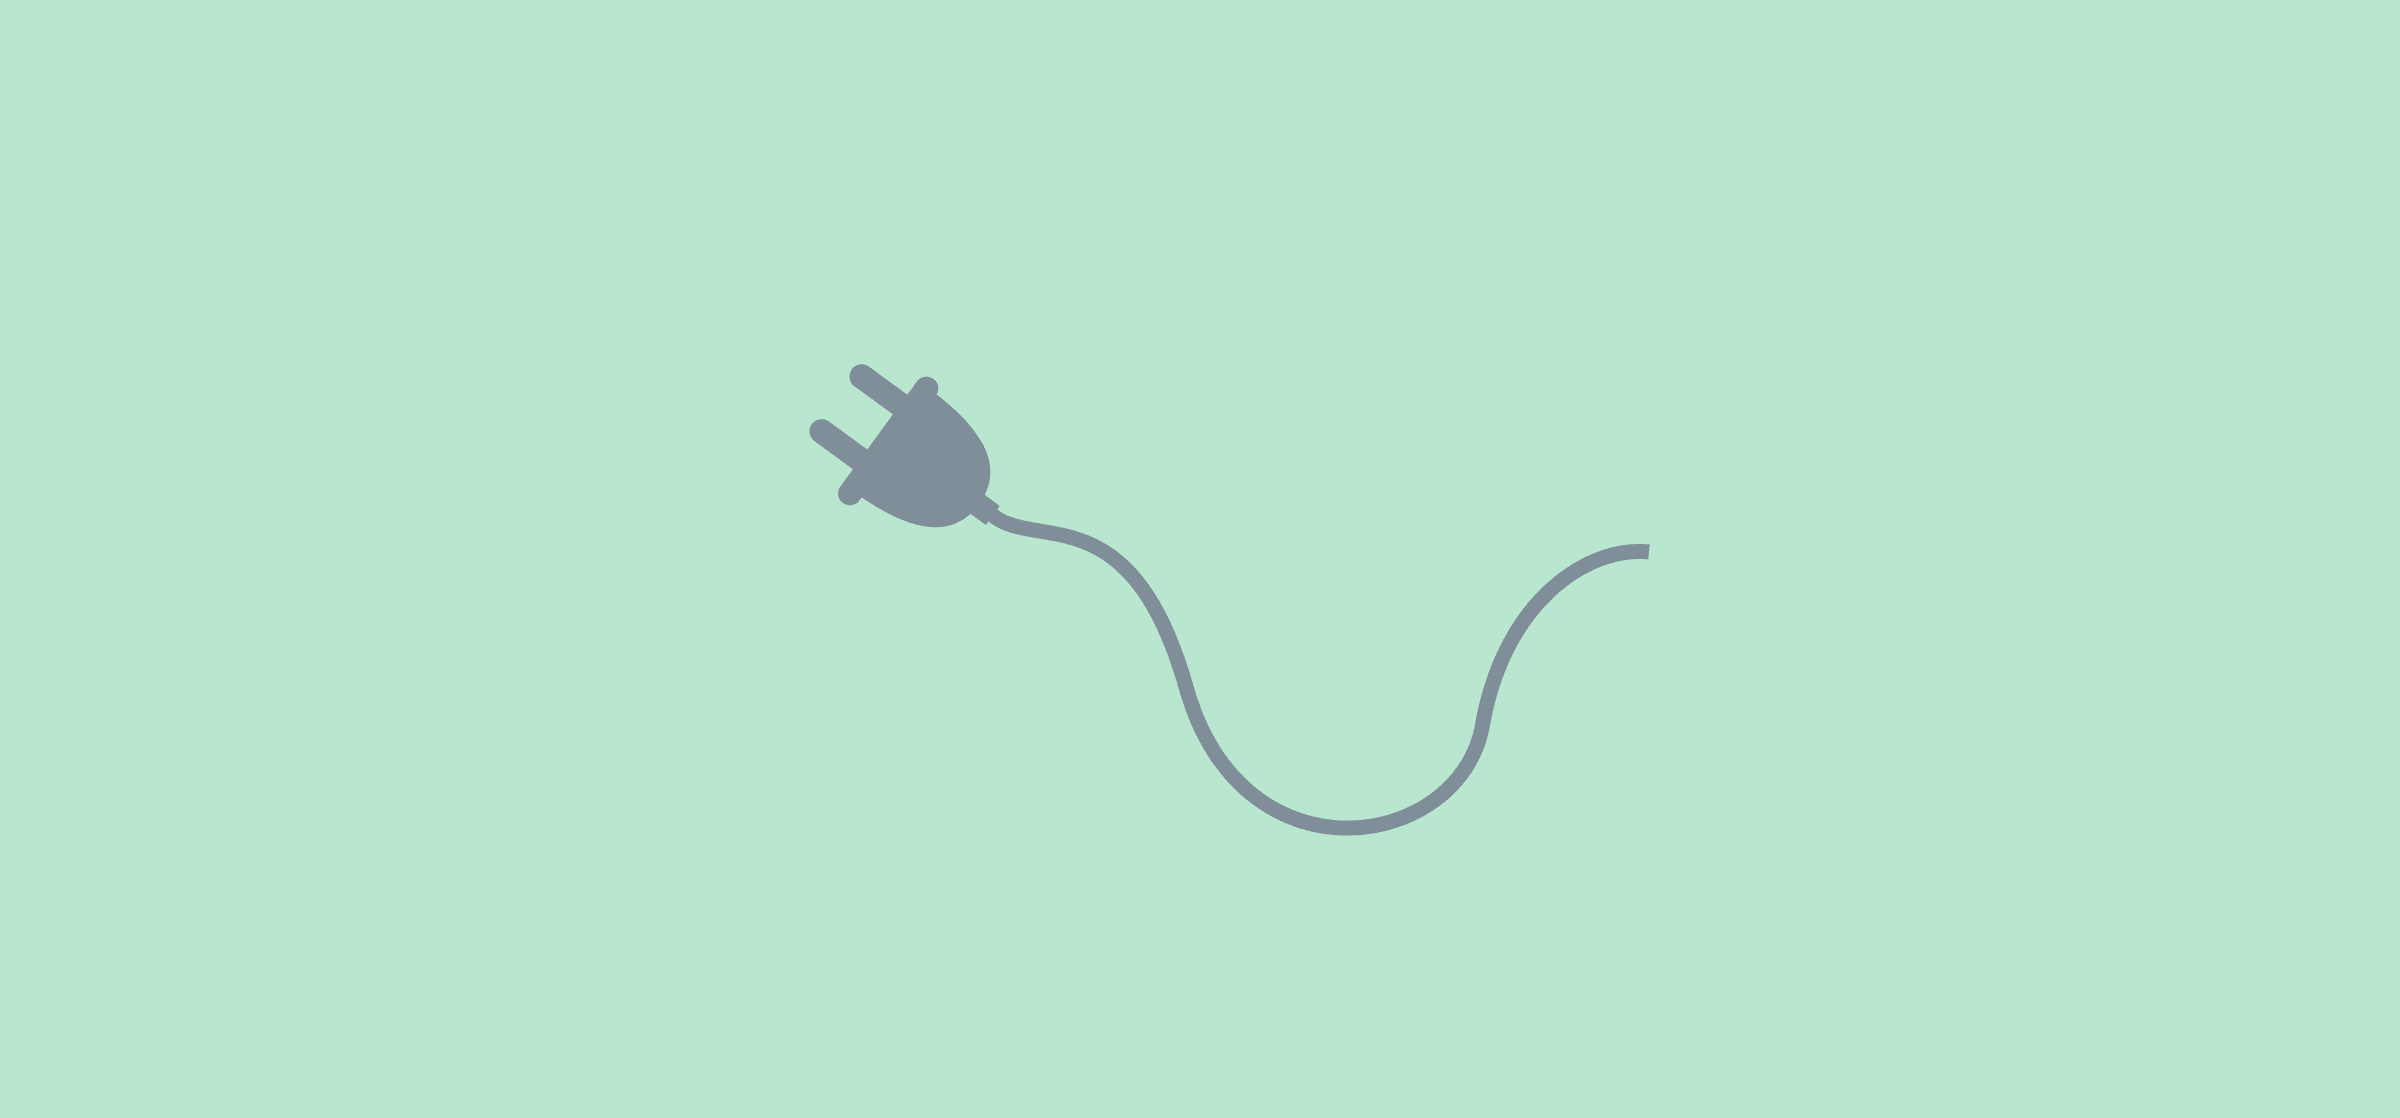 A cut extension cord, representing disconnecting from work for the holidays